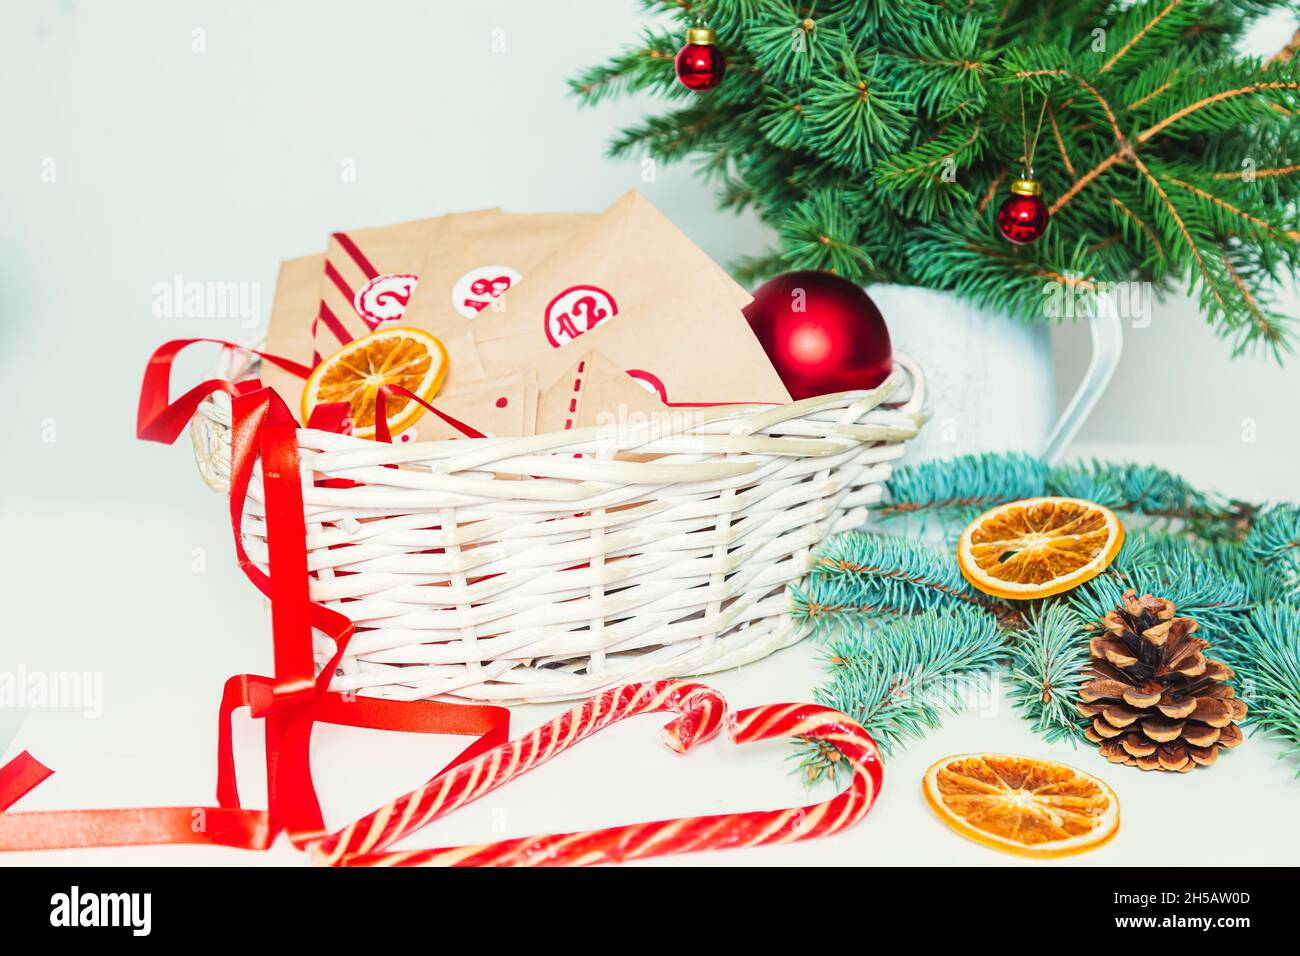 Advent calendar, fir branches and baubles. Kraft envelopes with numbers in a basket. Christmas tradition. Stock Photo